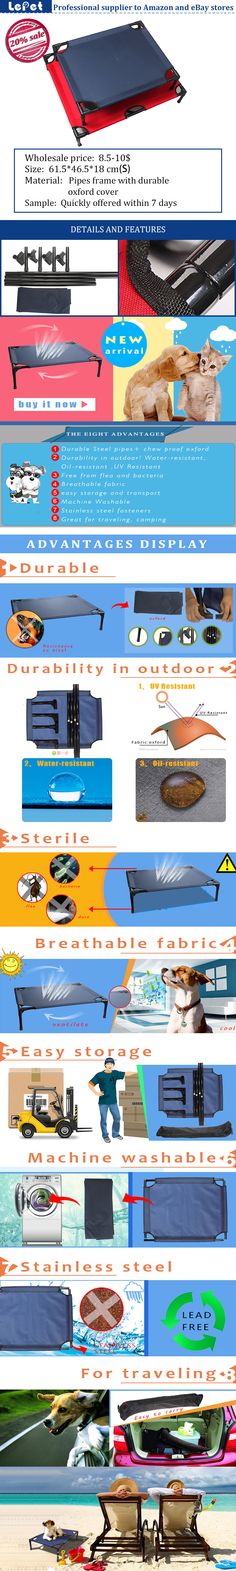 elevated dog bed,raised dog bed,Elevated Pet Dog camping cot wholesale supplier manufacturer china